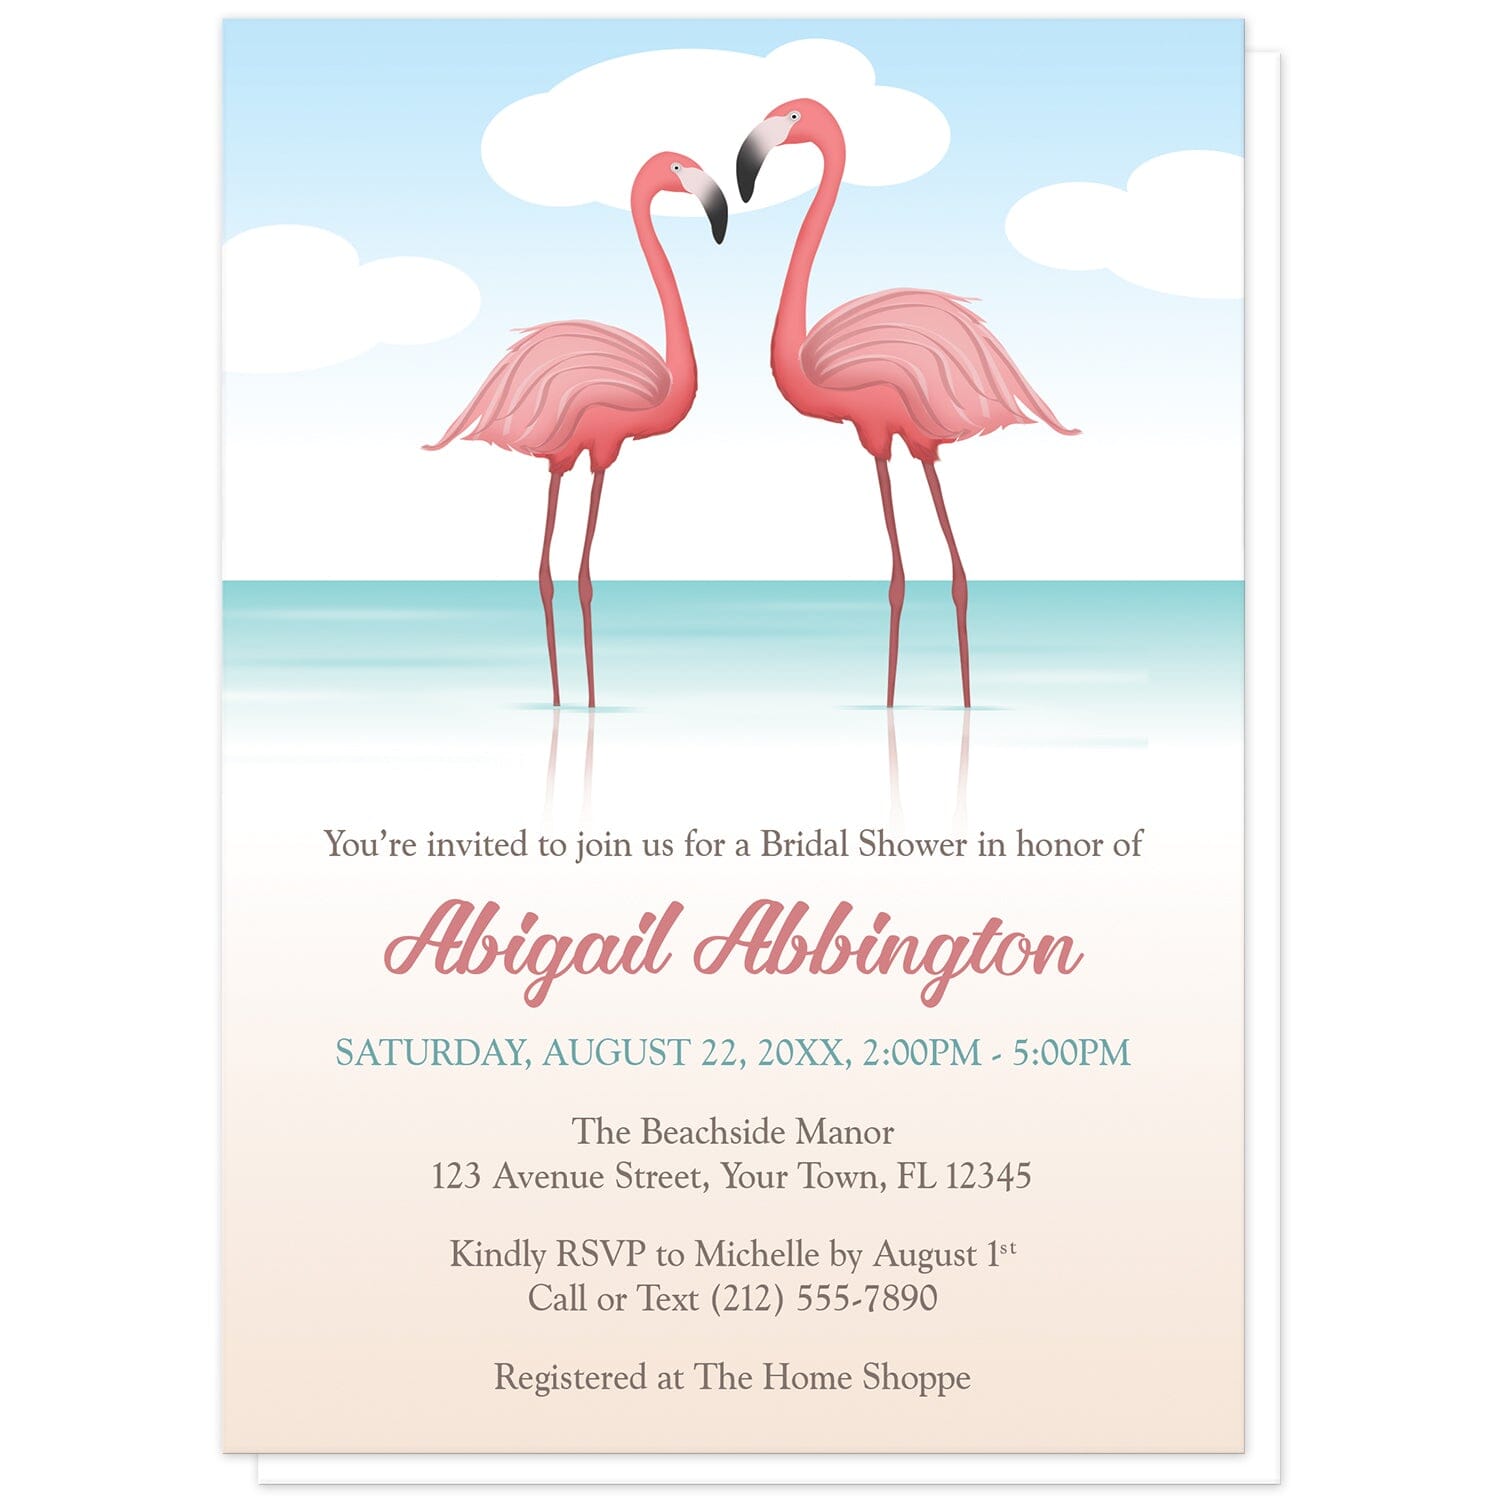 Flamingos in the Water Bridal Shower Invitations at Artistically Invited. Flamingos in the water bridal shower invitations with a tropical illustration of two pink flamingos standing in the water. Your personalized bridal shower celebration details are custom printed in pink, teal, and brown over the beach background design below the flamingos.